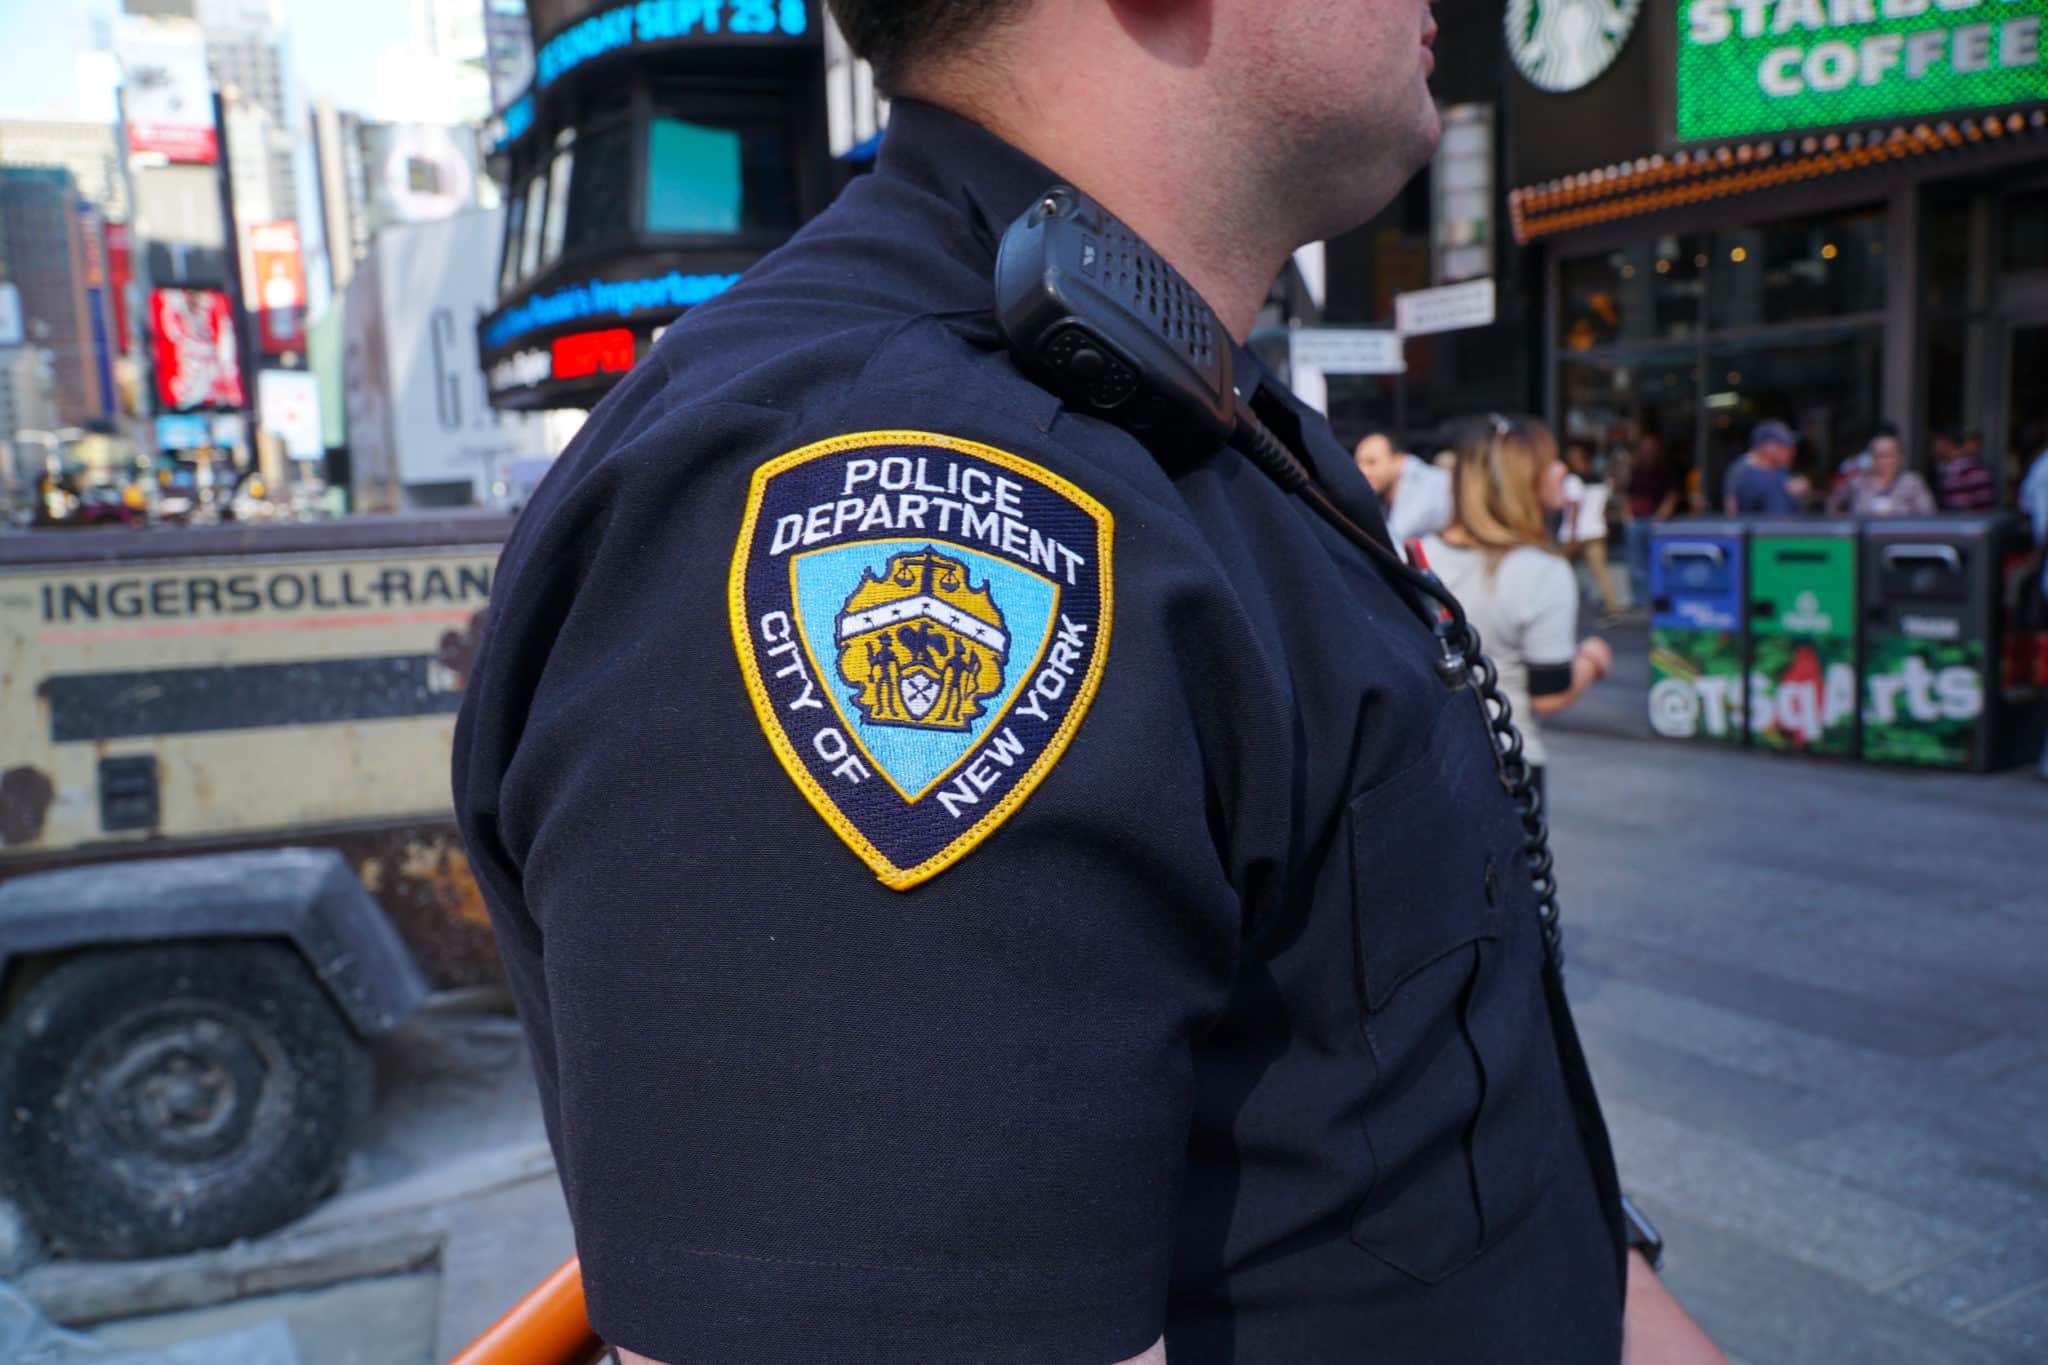 NYPD officer stands guard in Times Square Manhattan patrol